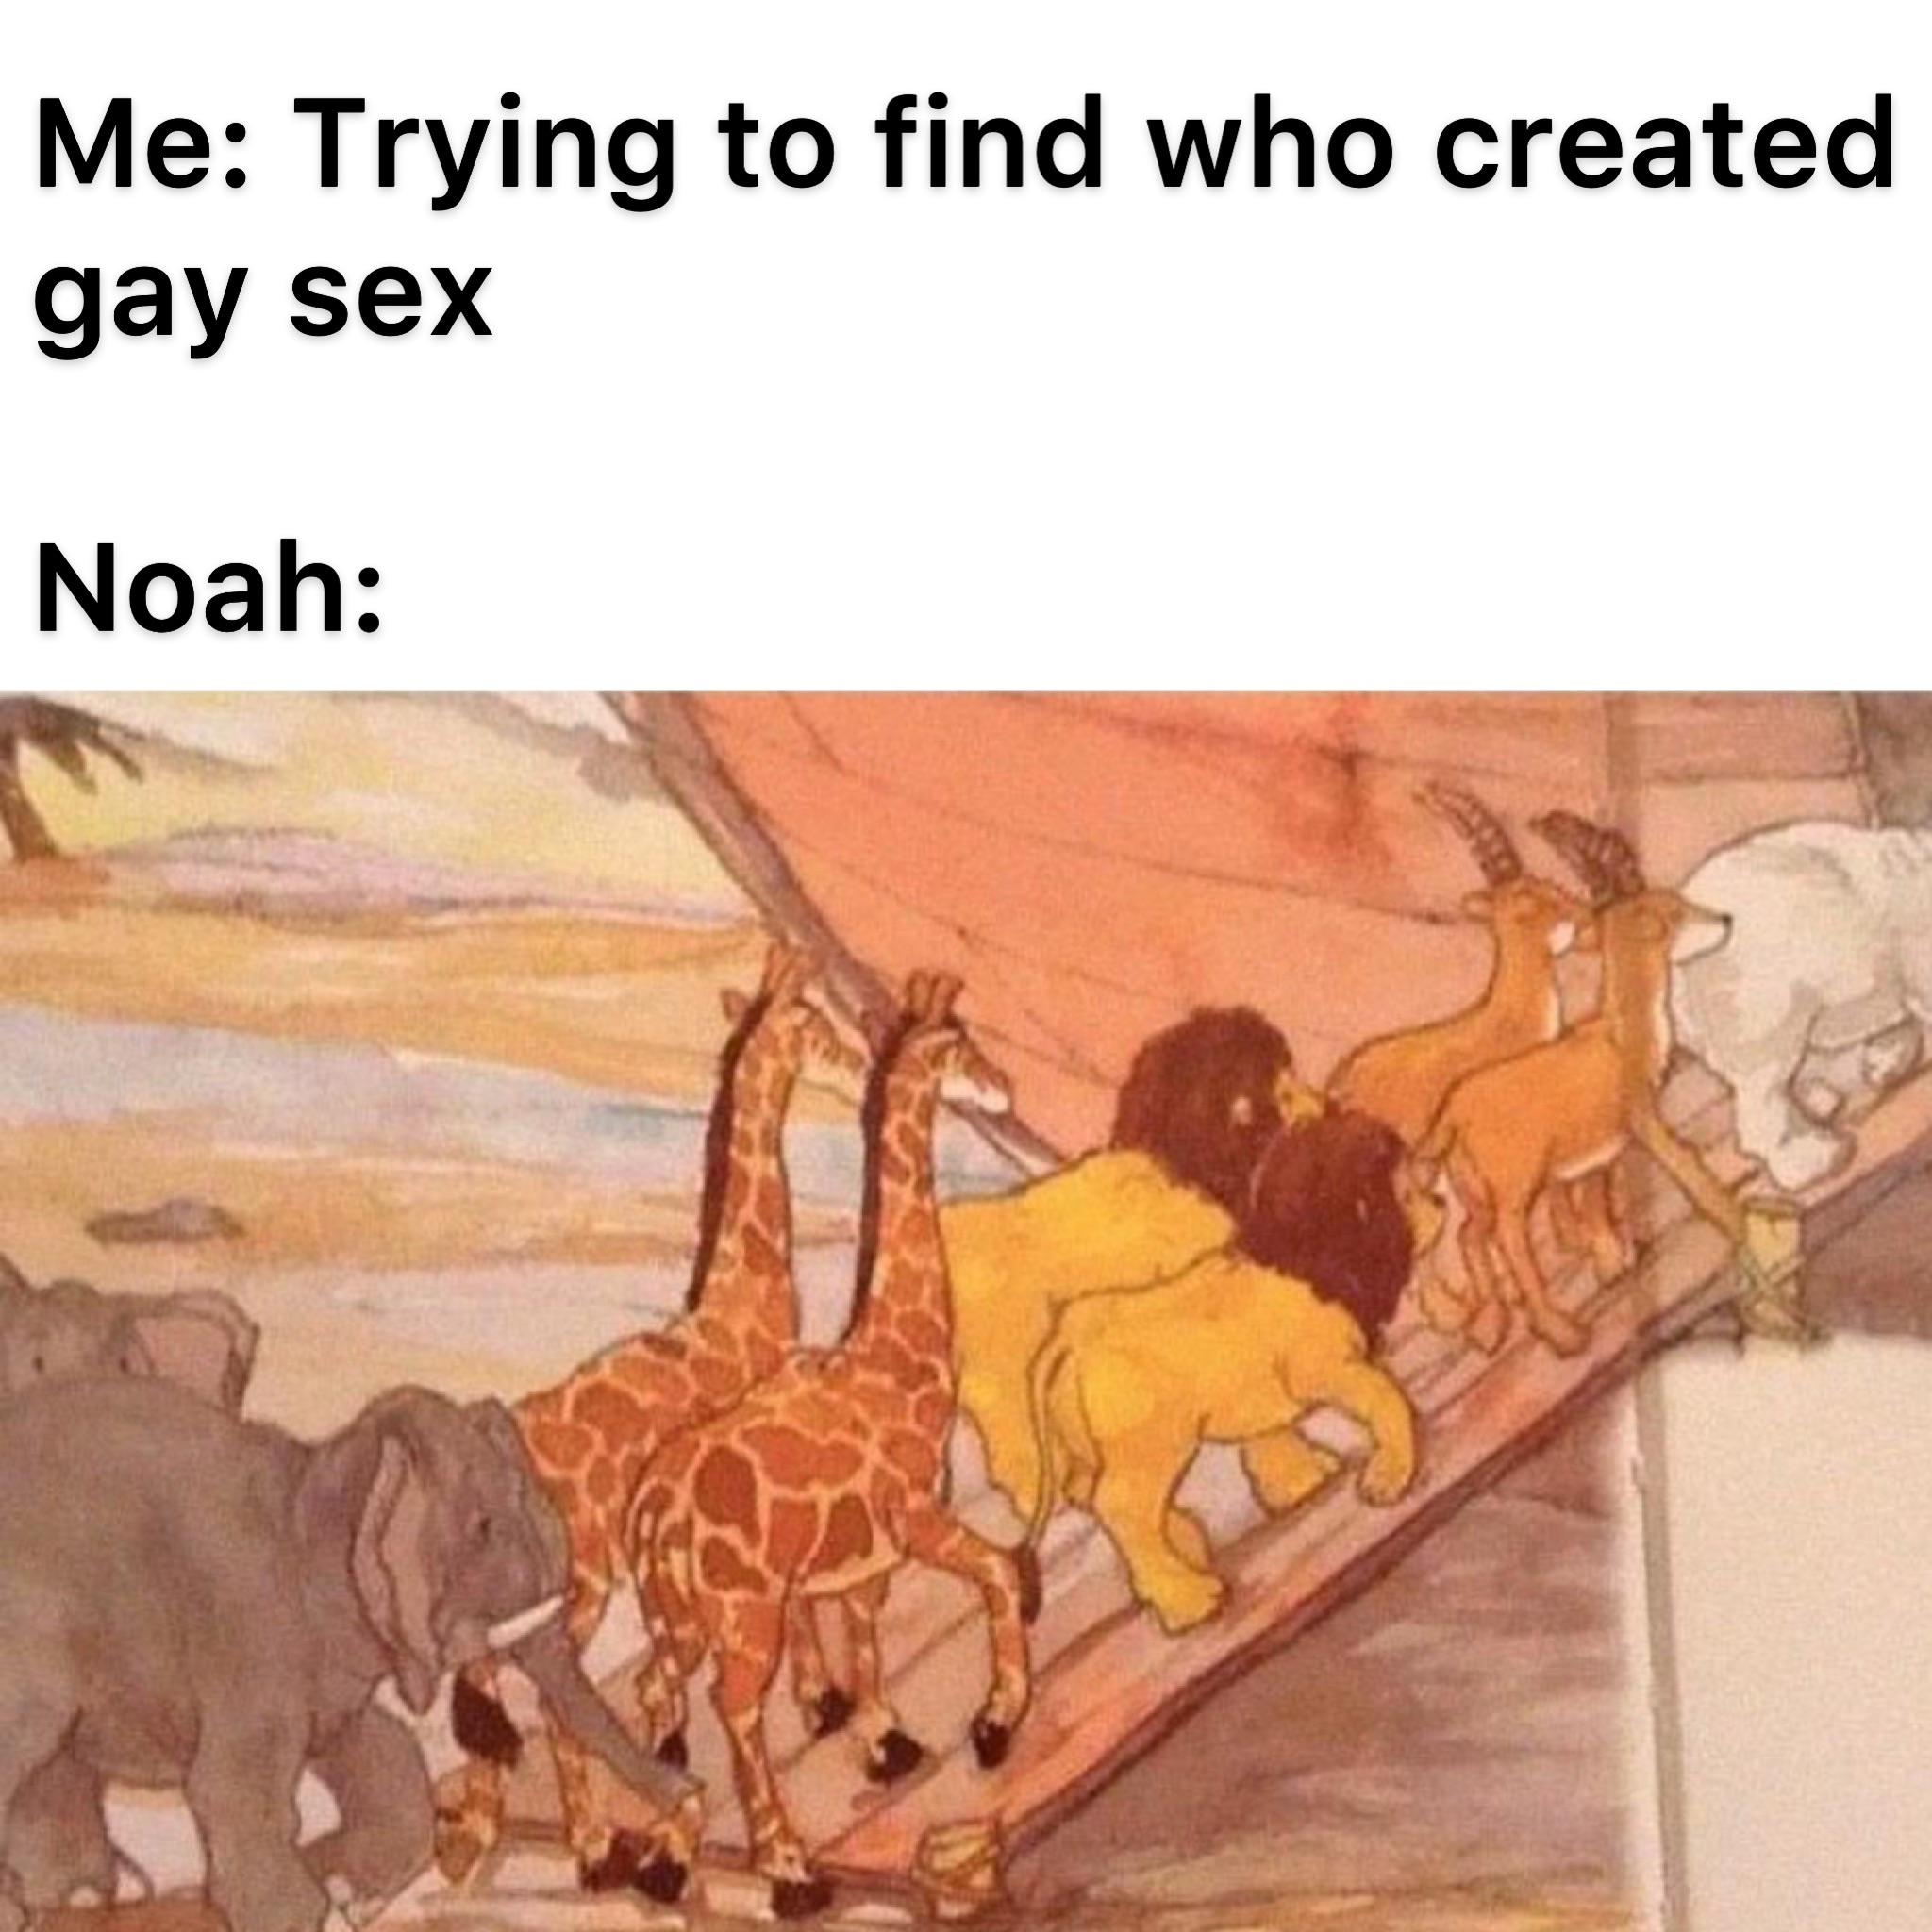 noah get the boatanime - Me Trying to find who created gay sex Noah